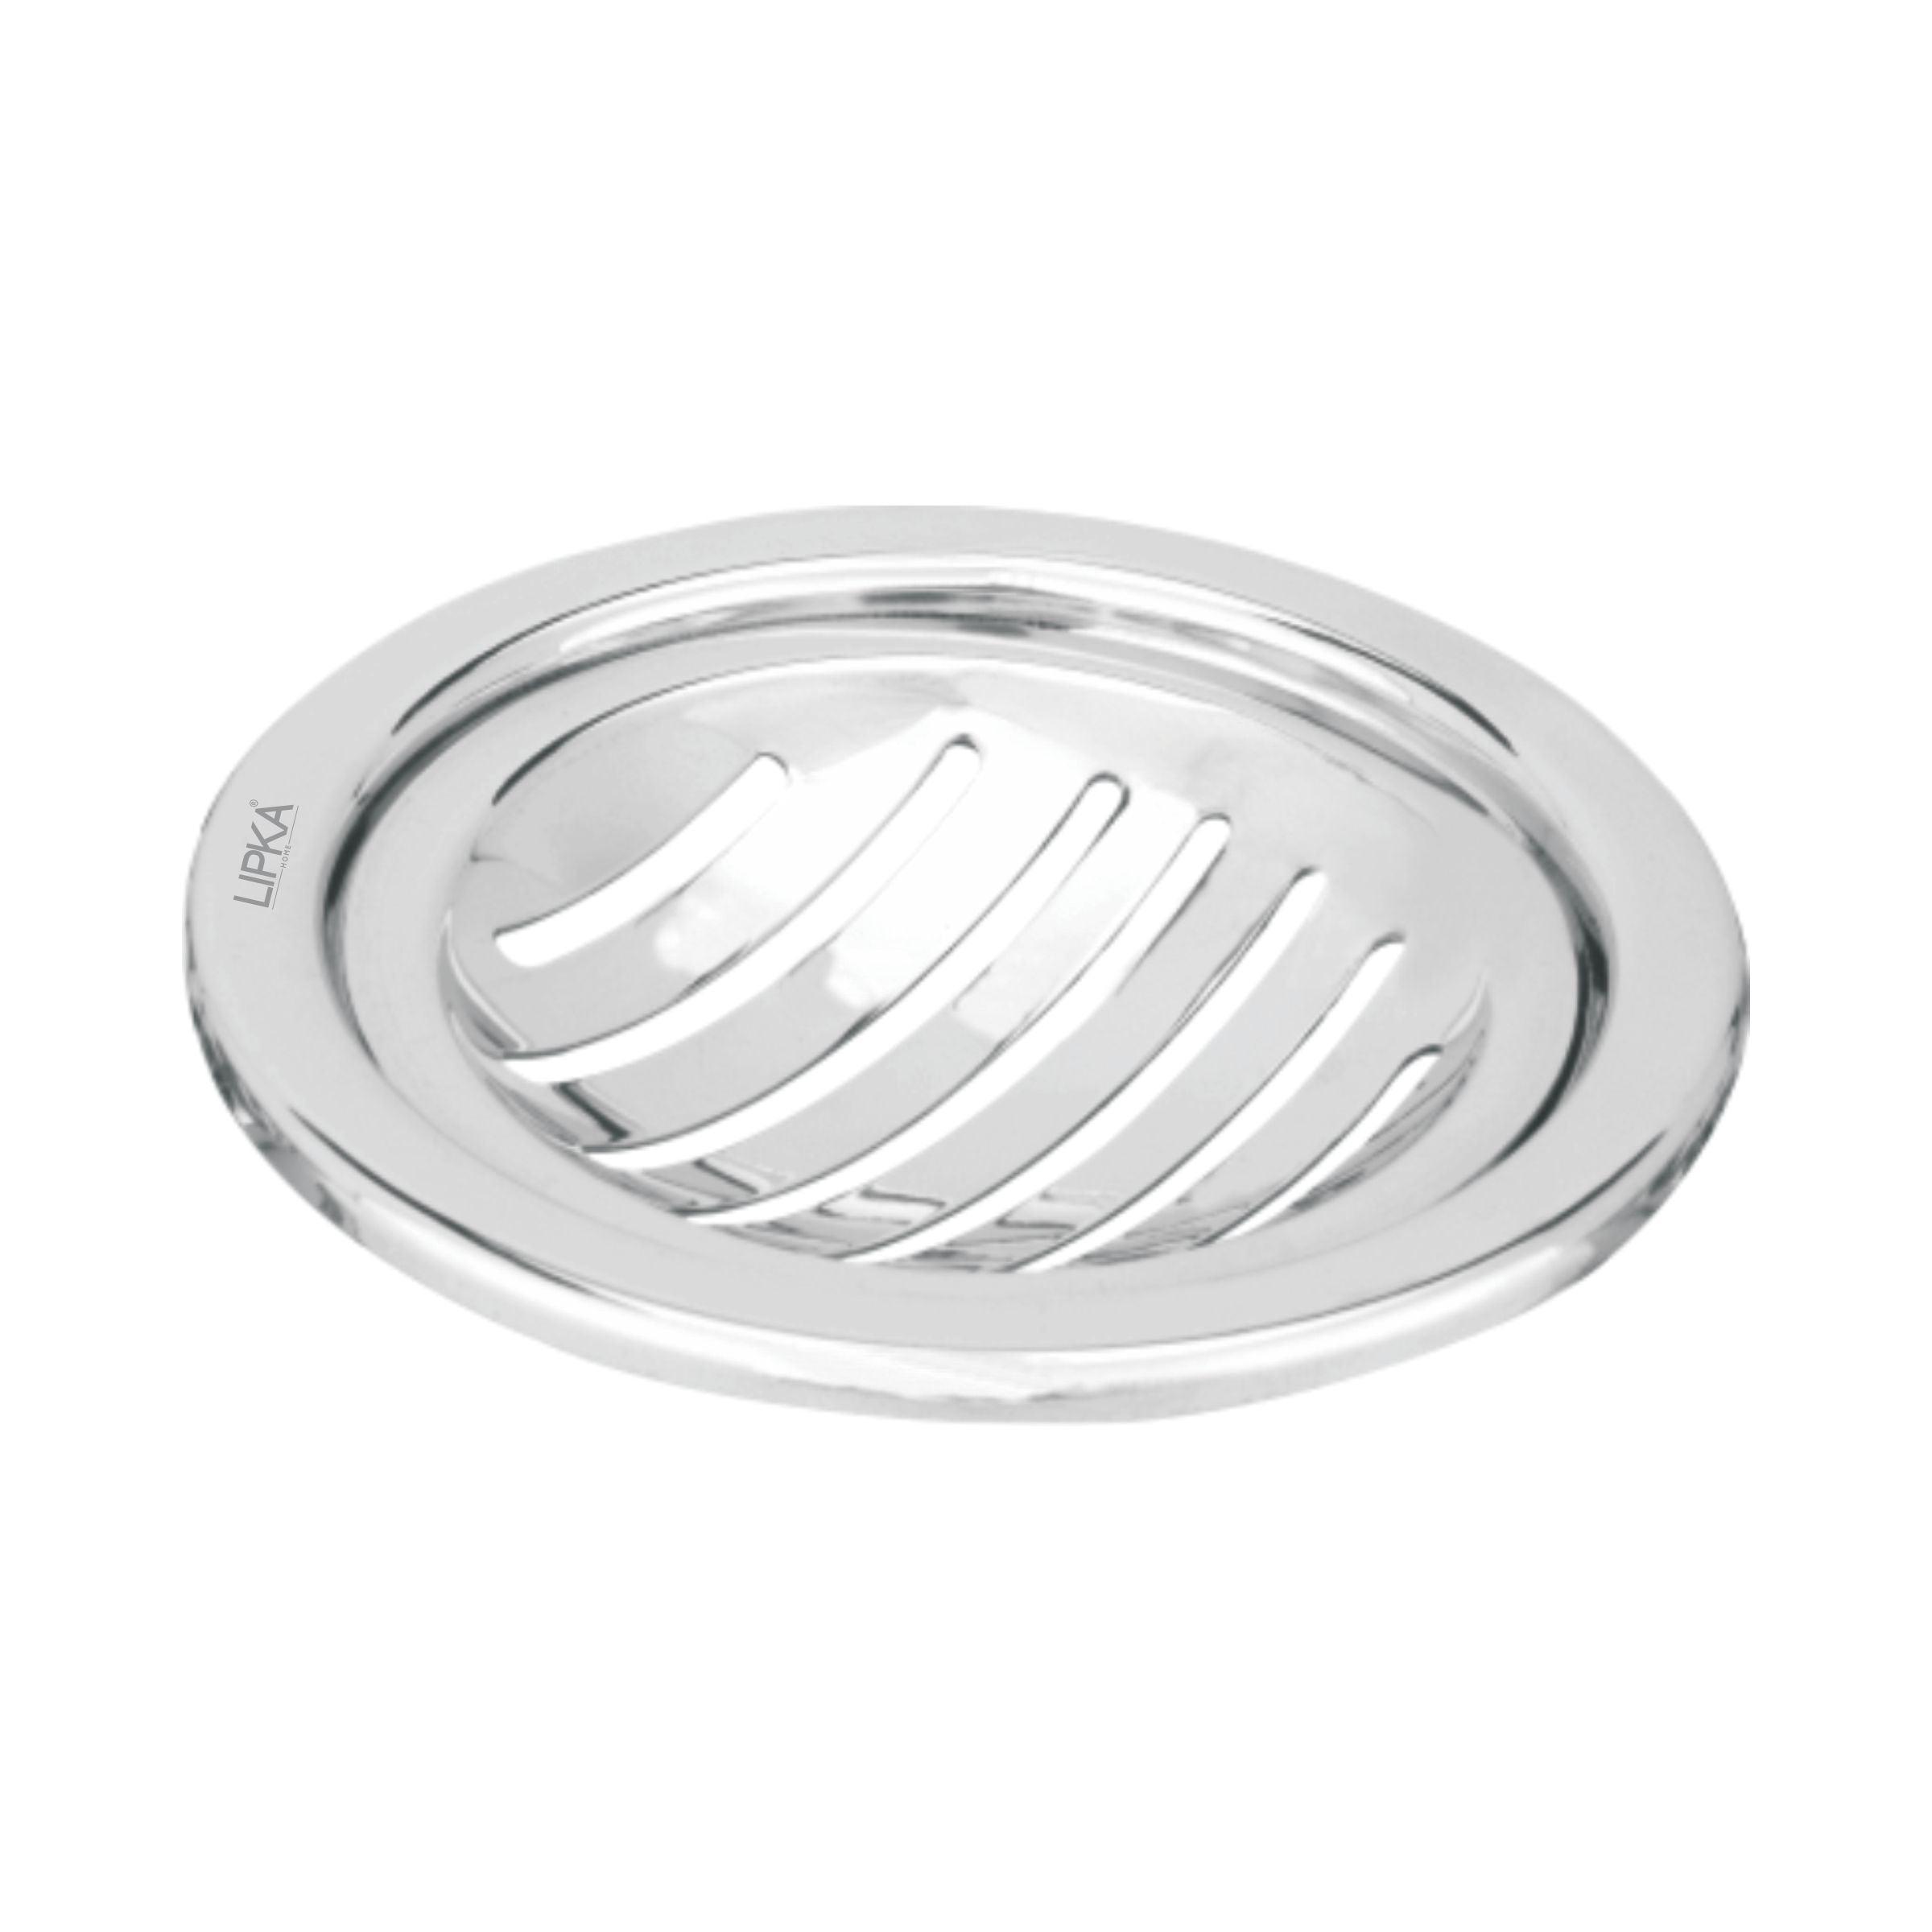 Eon Round Floor Drain with Classic Jali (5 inches)